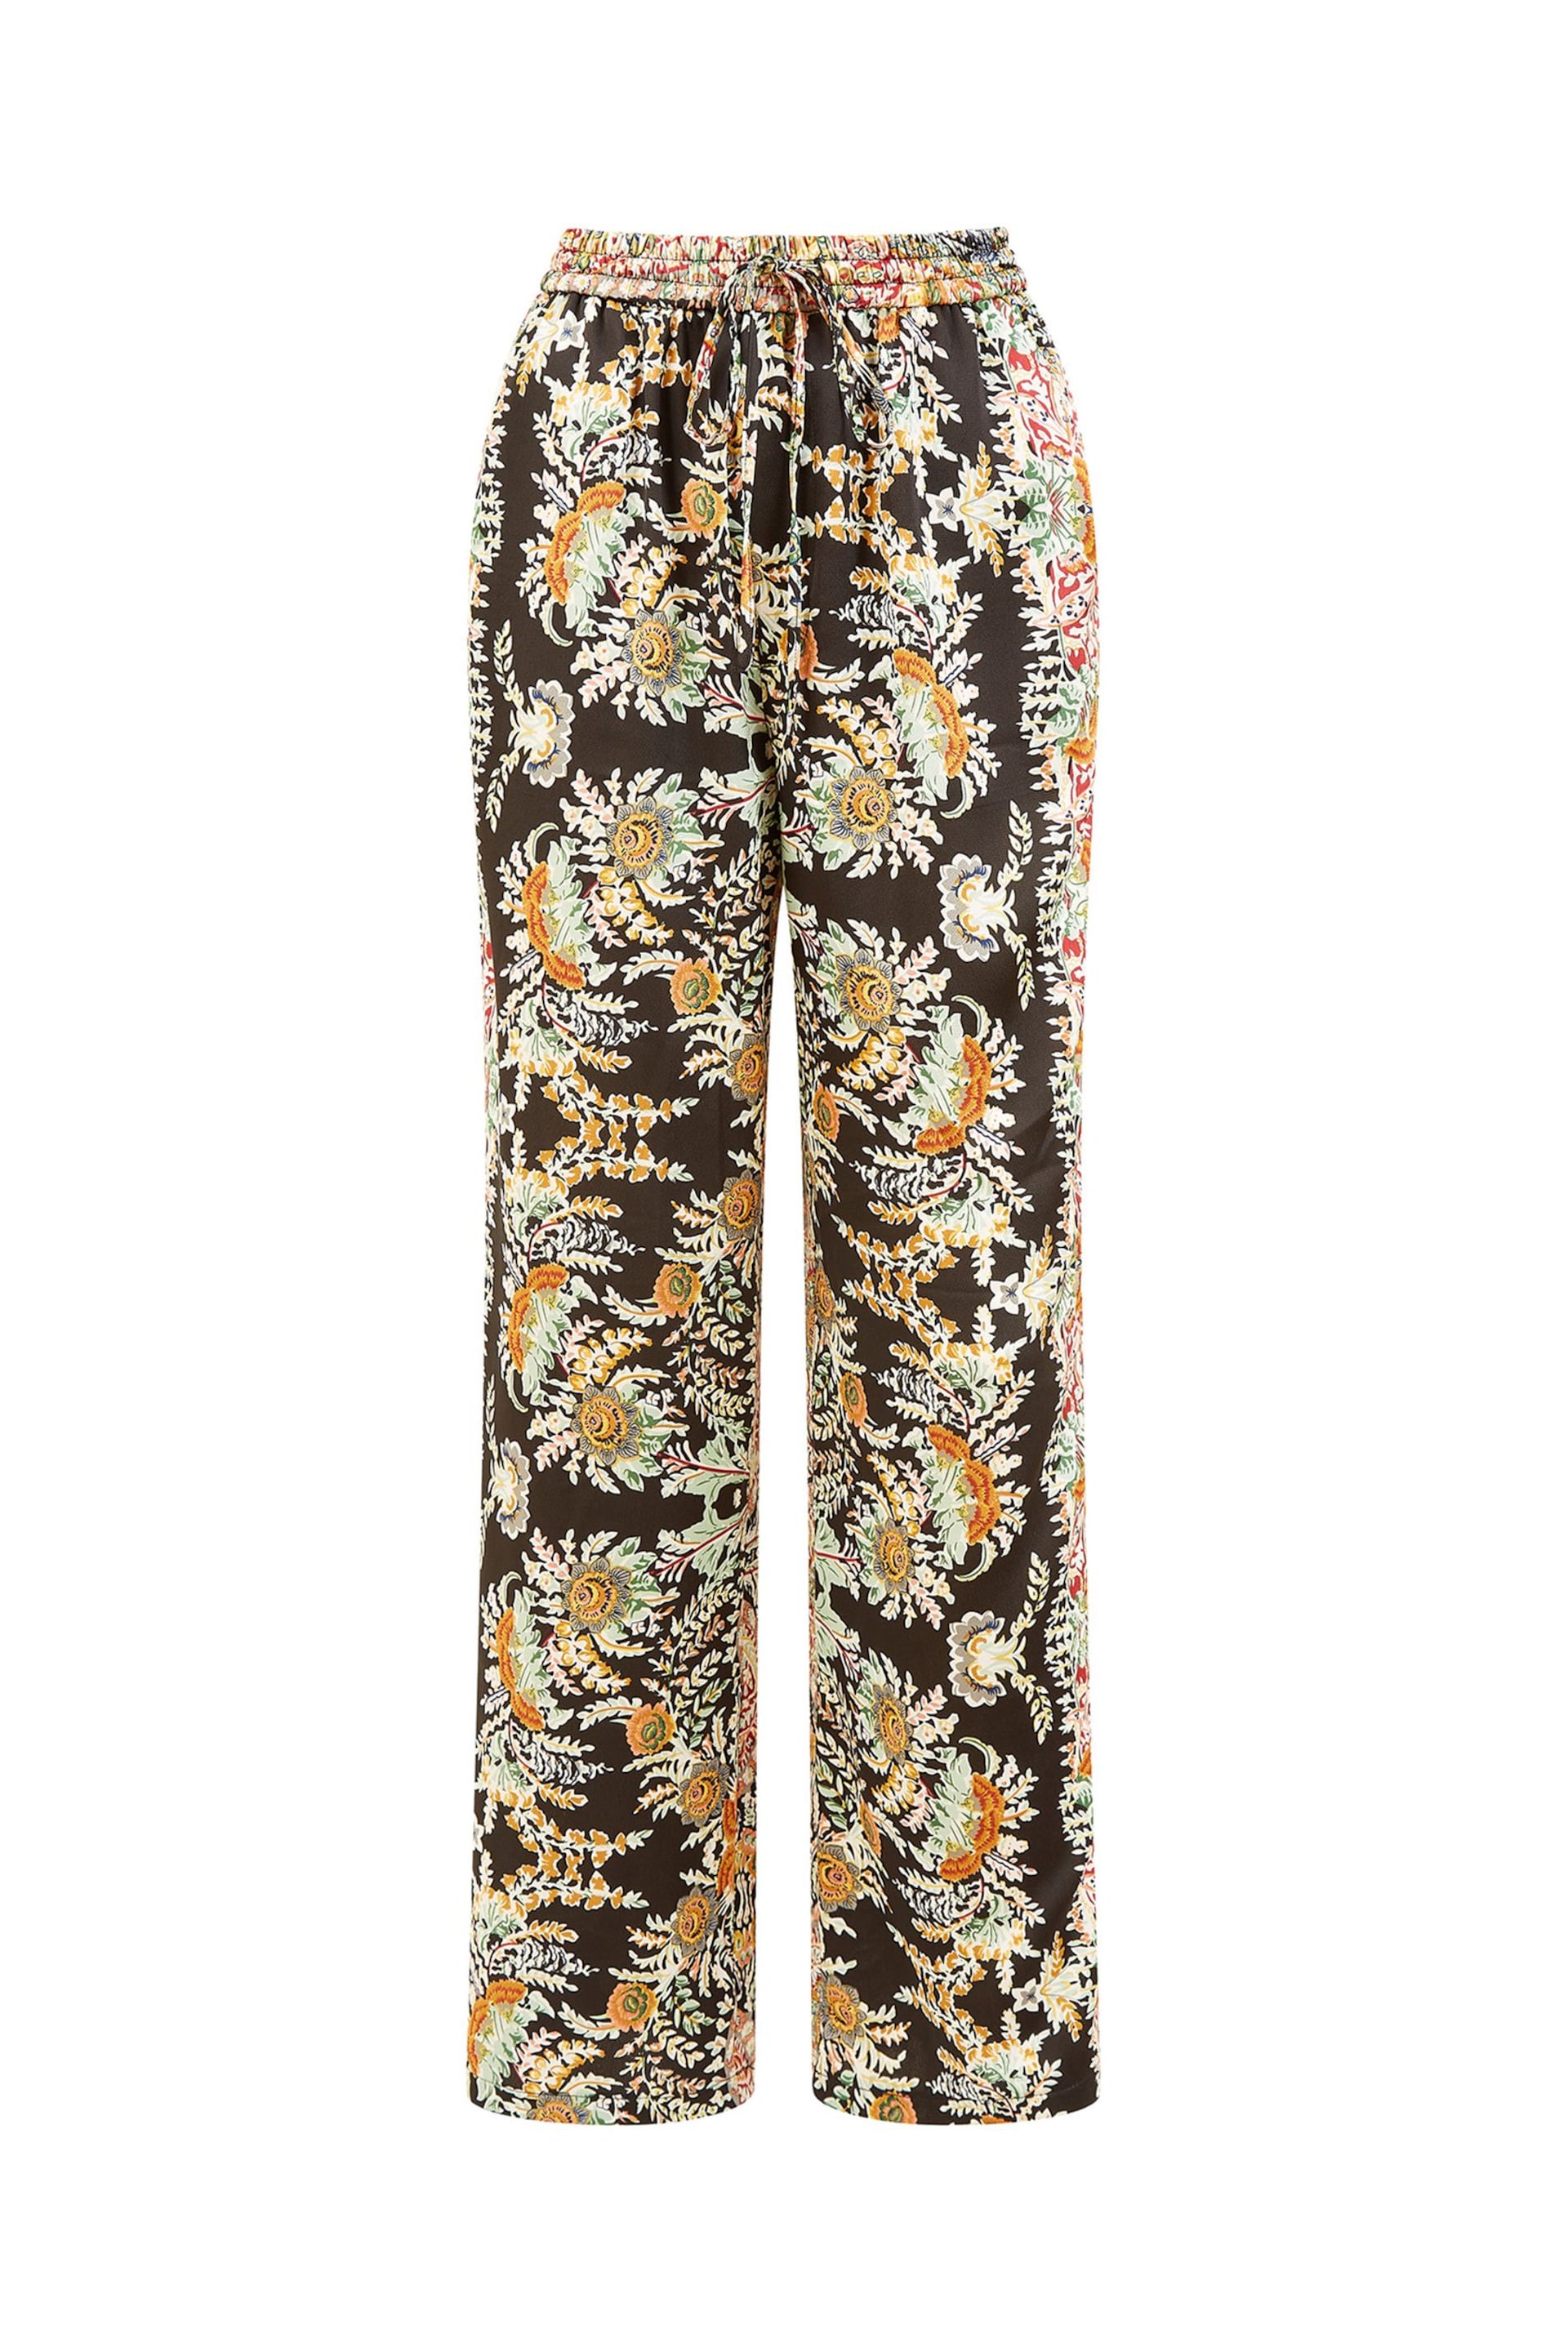 Yumi Black Relaxed Fit Paisley Print Trousers - Image 4 of 4